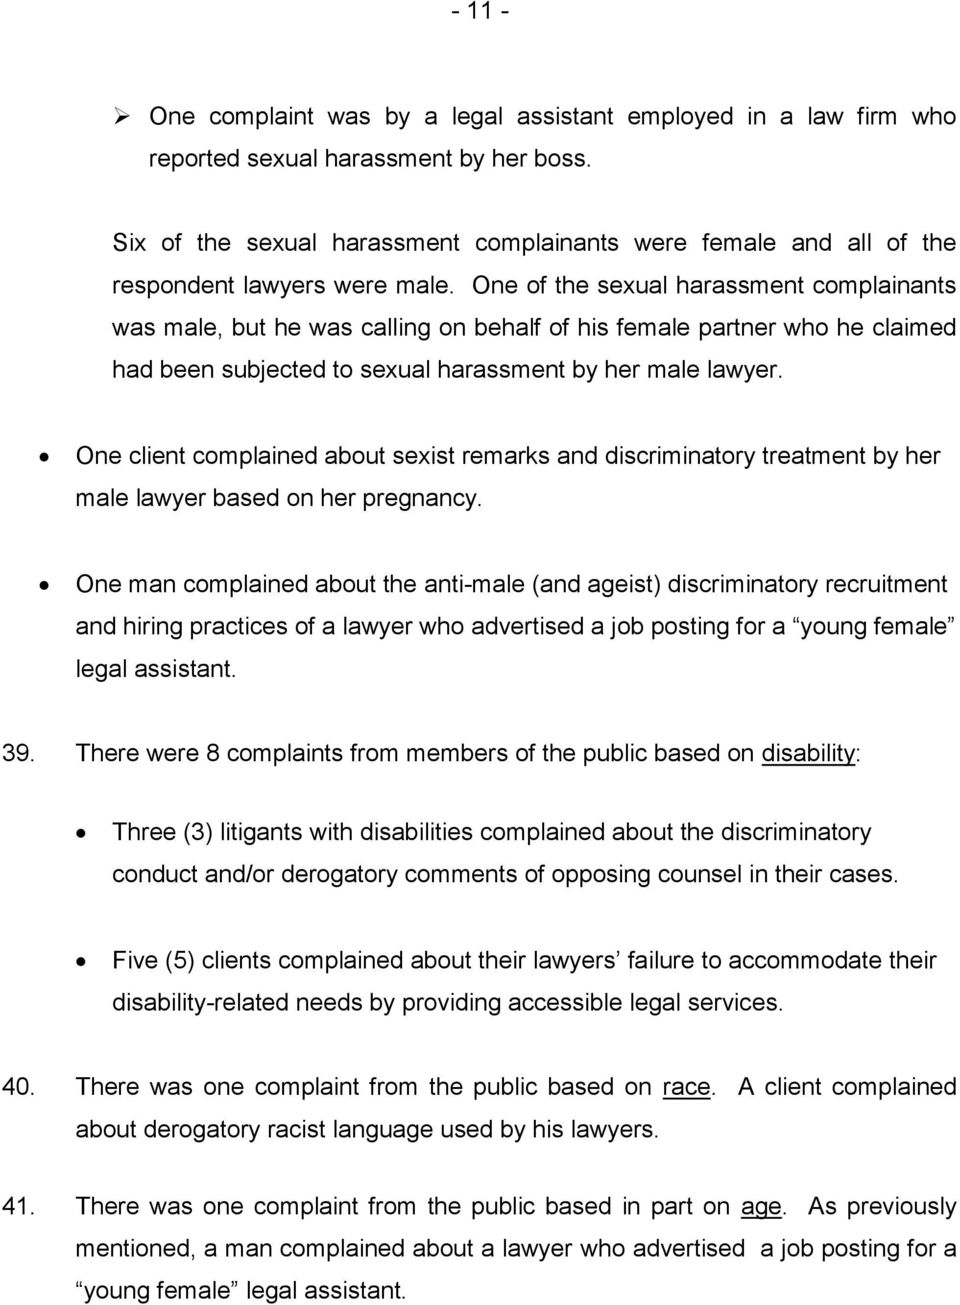 One of the sexual harassment complainants was male, but he was calling on behalf of his female partner who he claimed had been subjected to sexual harassment by her male lawyer.